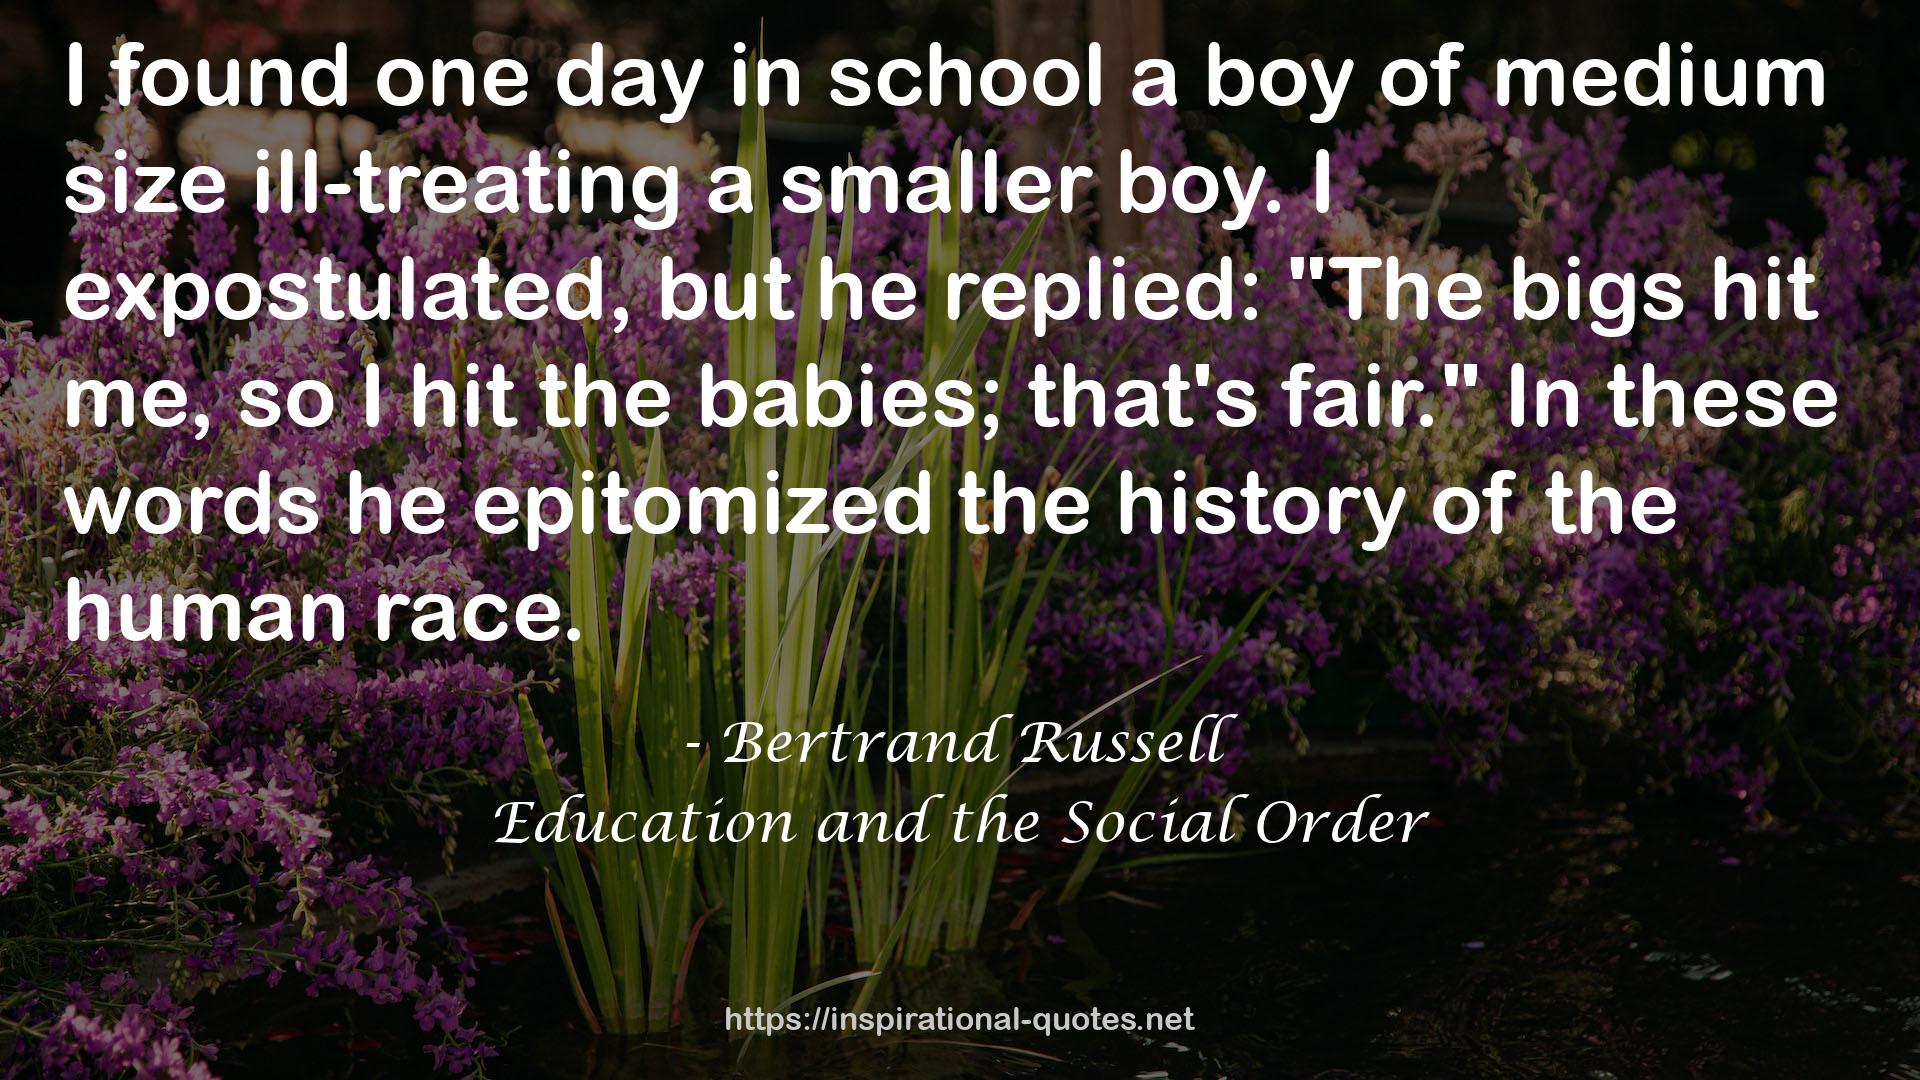 Education and the Social Order QUOTES